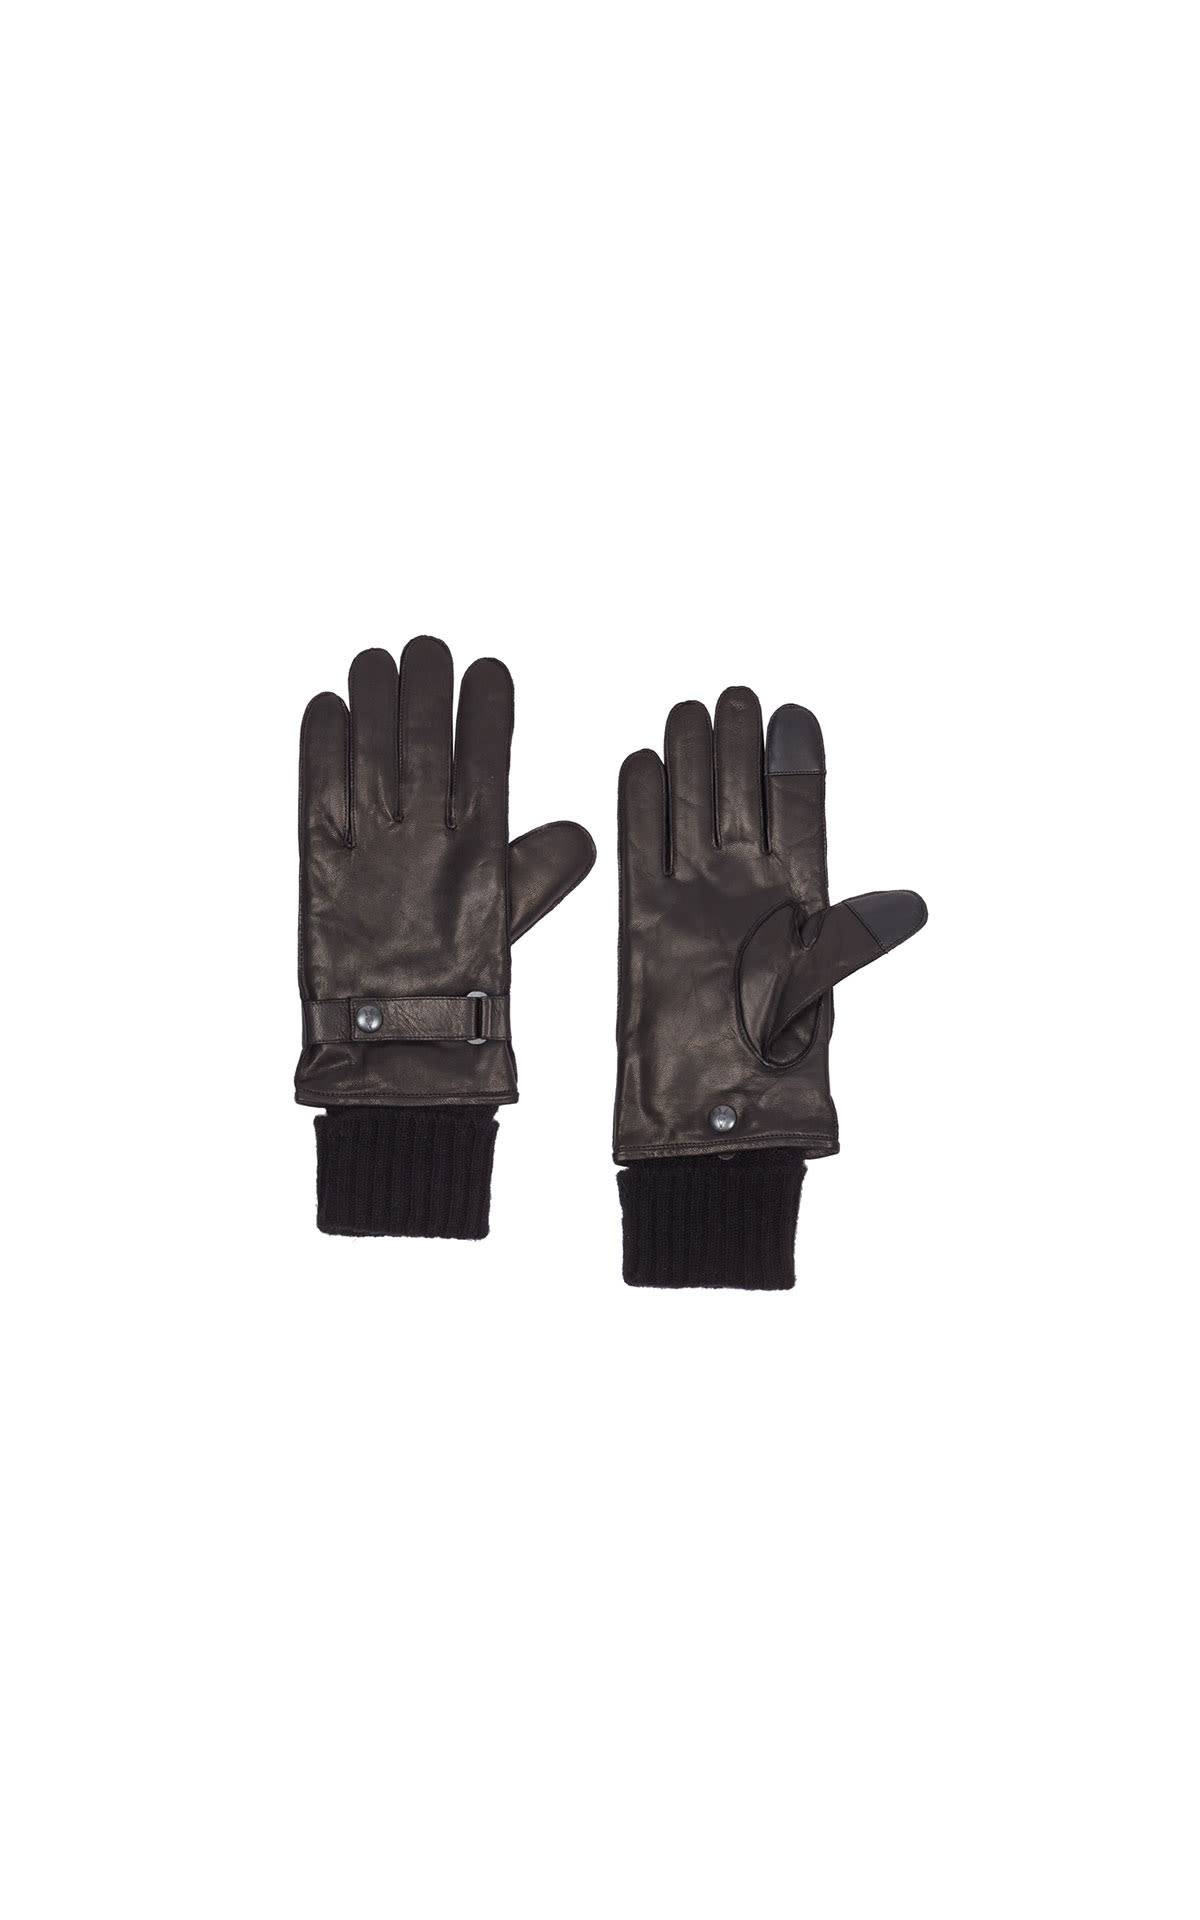 AllSaints Yiel leather glove from Bicester Village